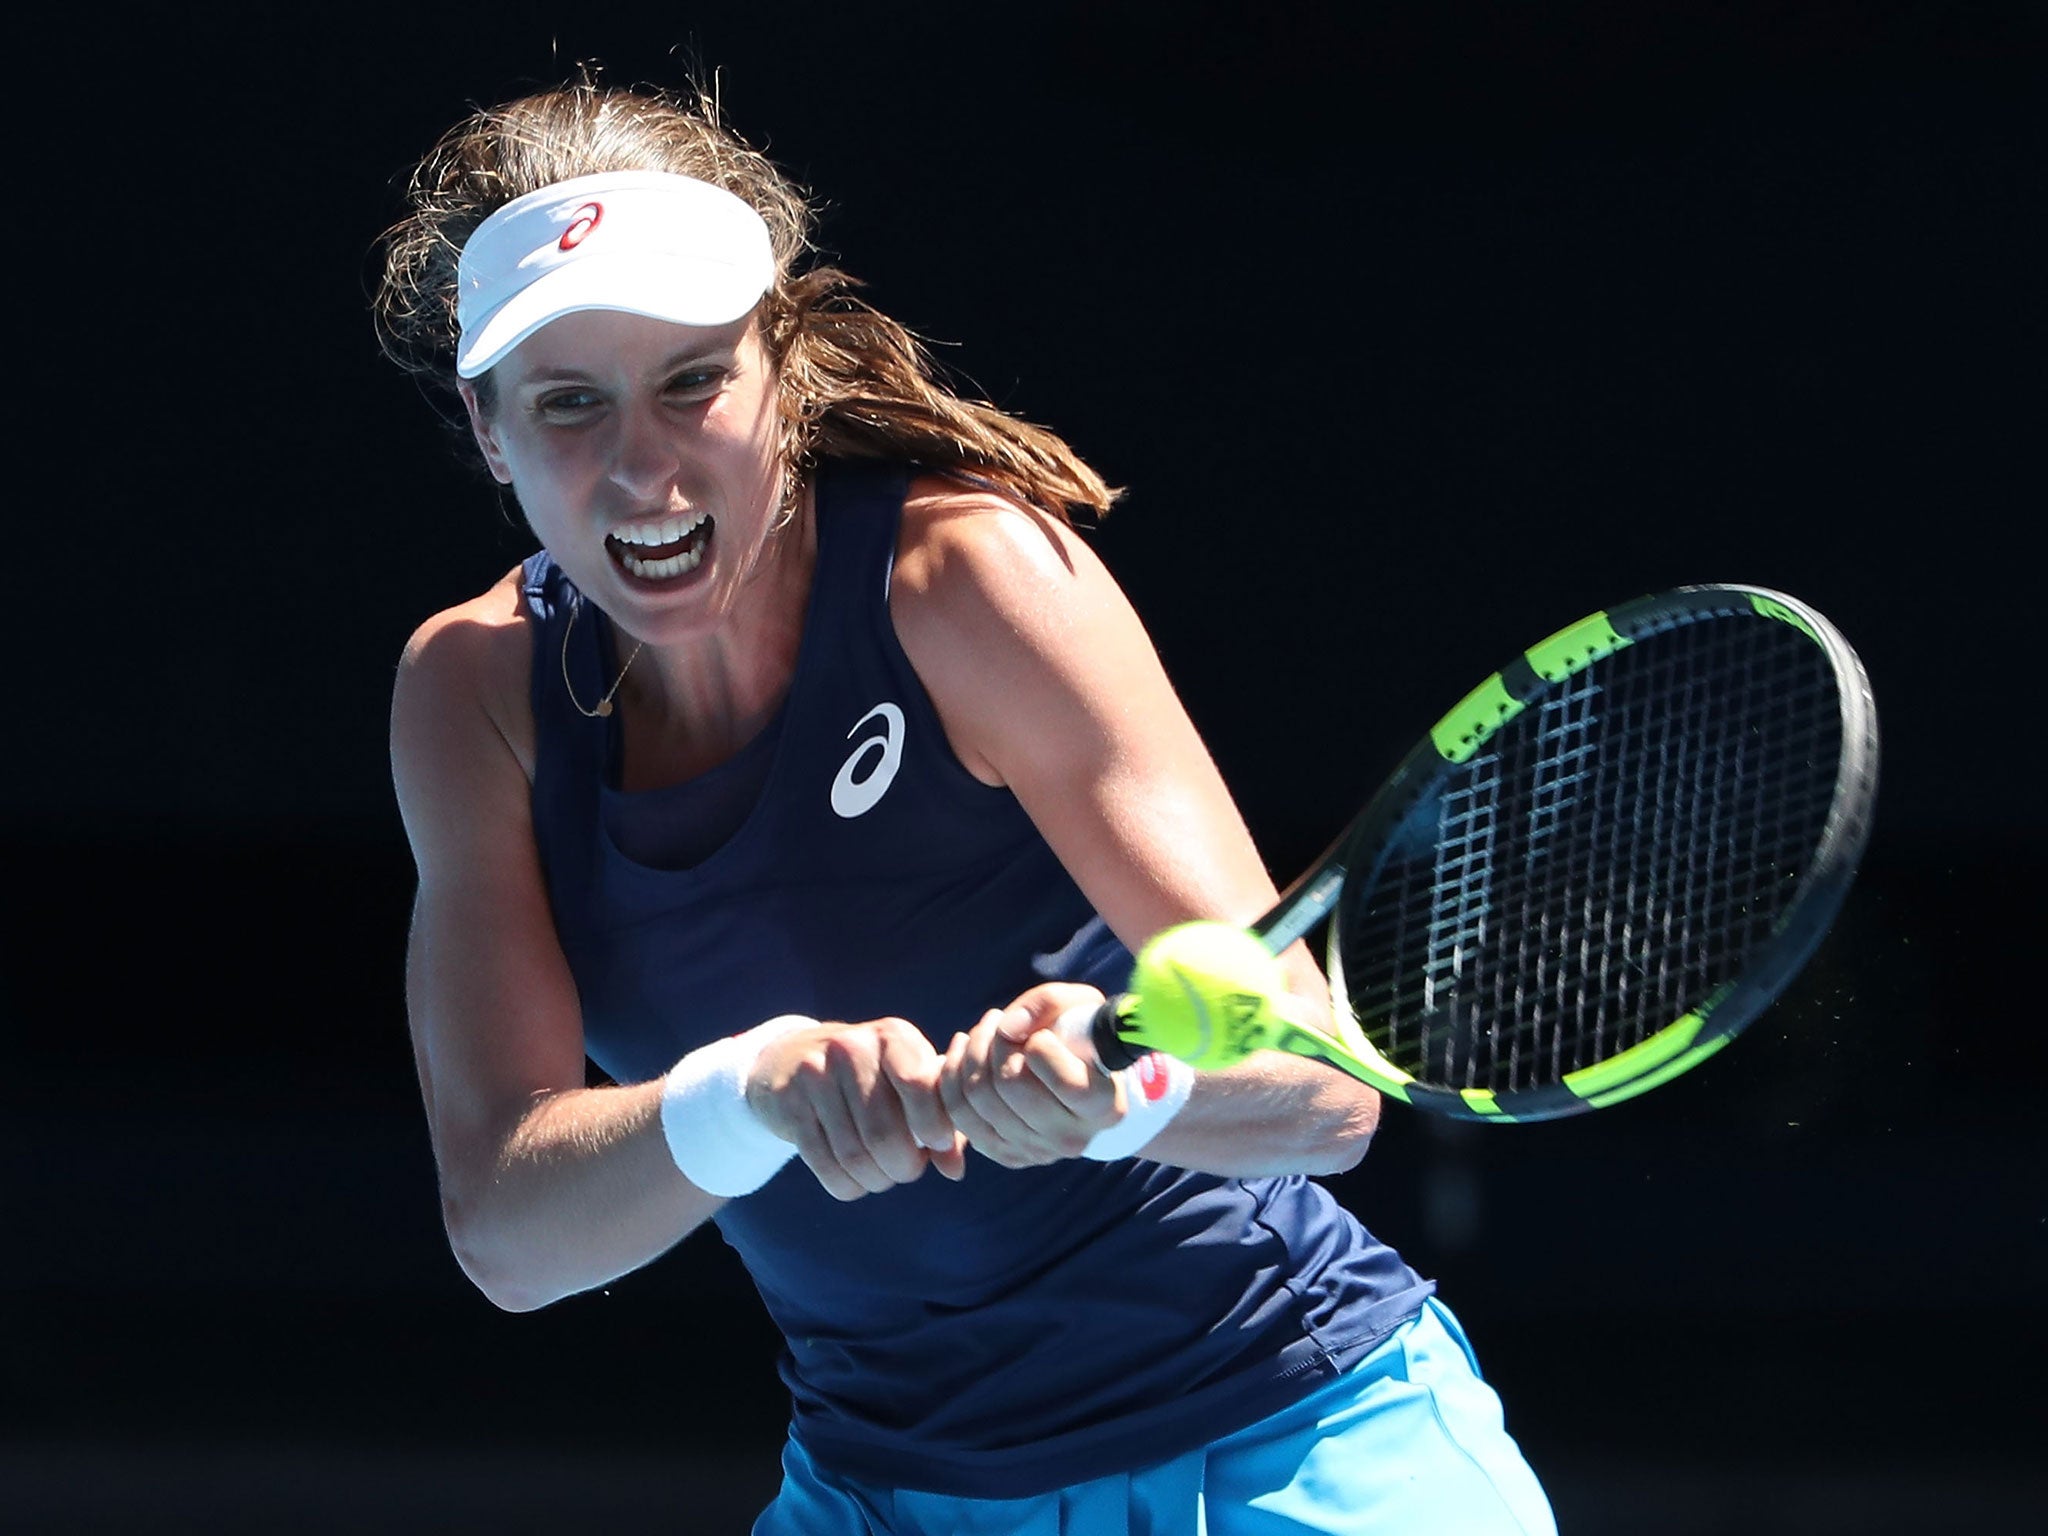 Konta completed a ruthless display to win the second round tie in straight sets